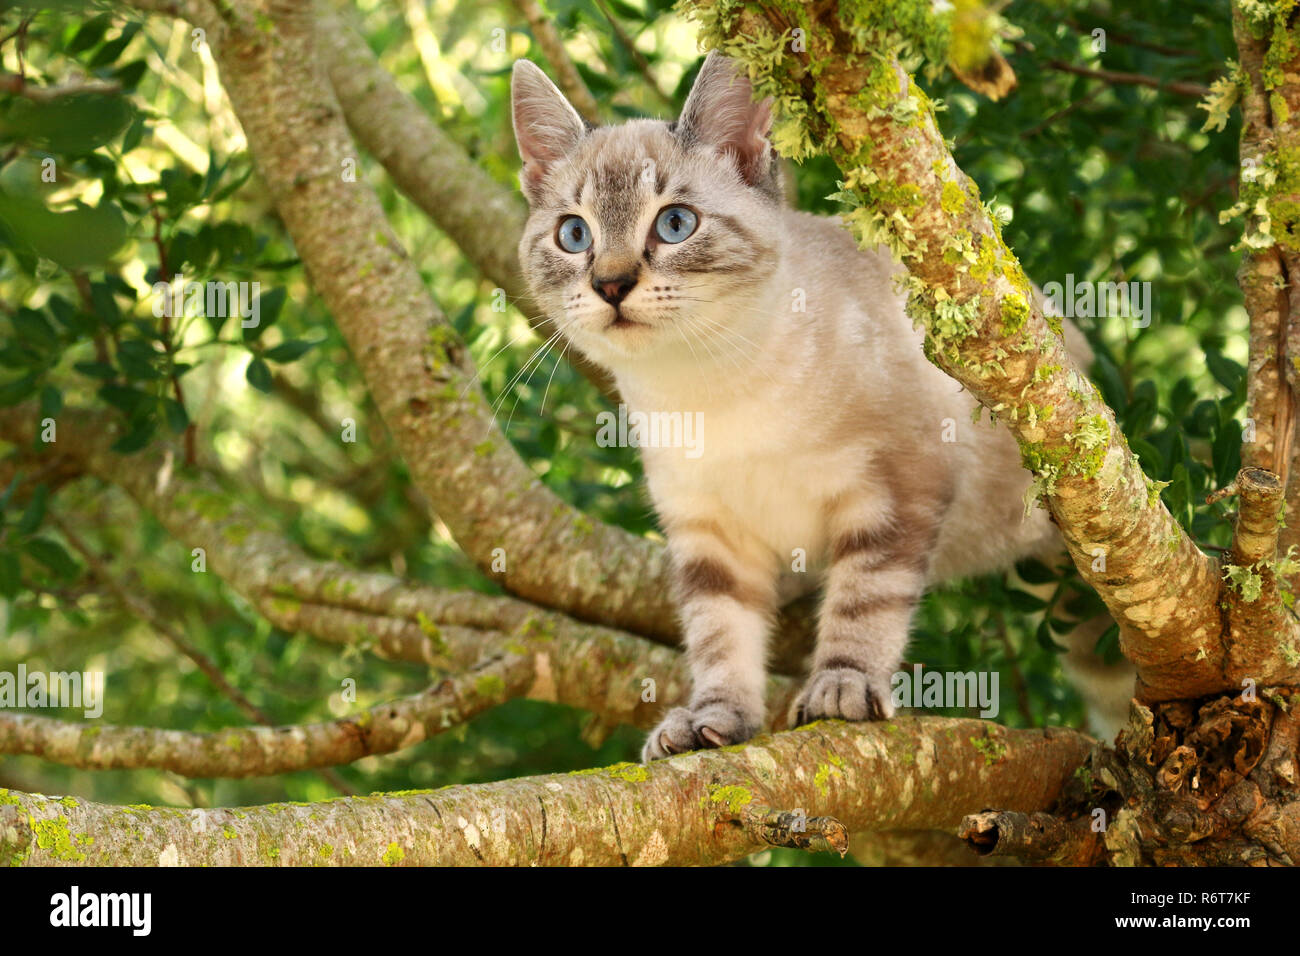 young domestic cat, 3 month old, seal tabby point, climbing a tree Stock Photo